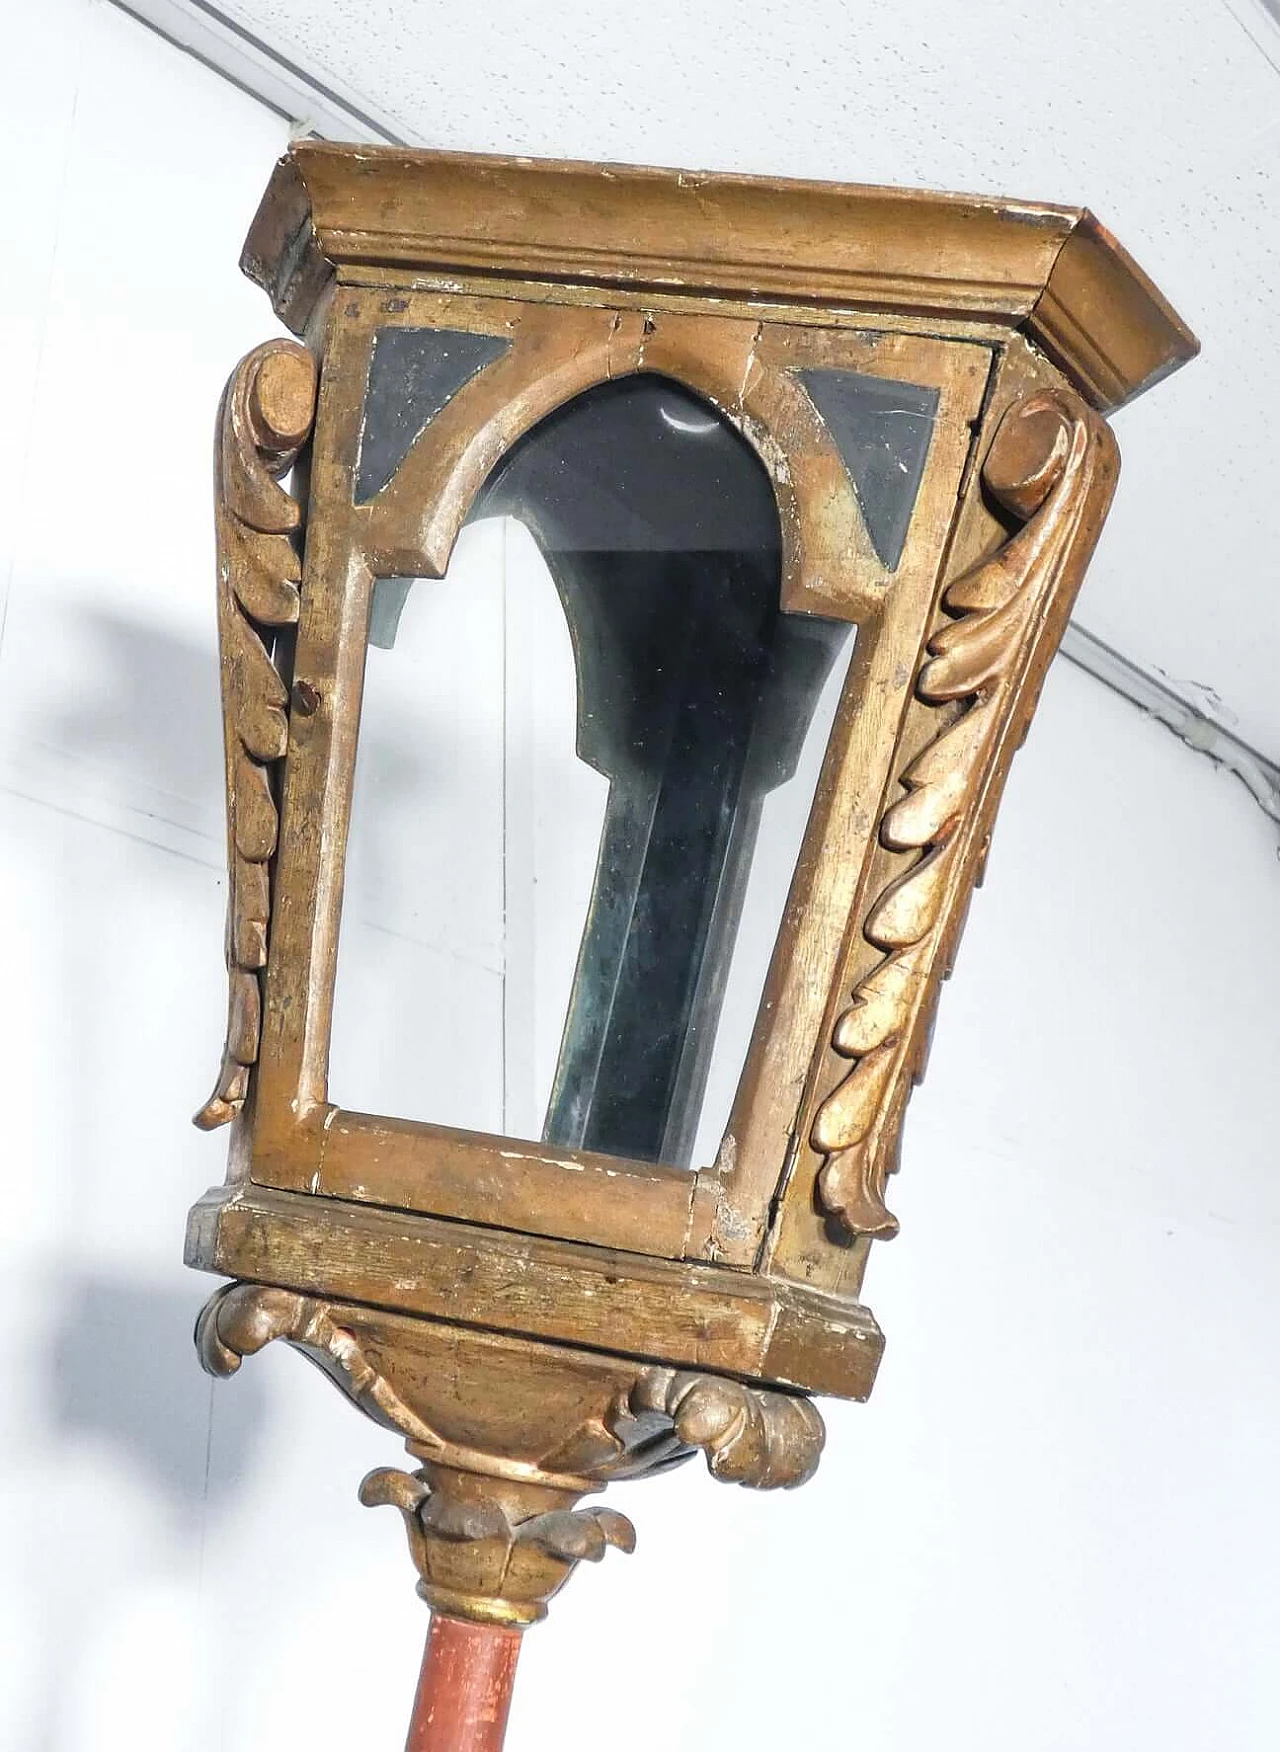 Carved, gilded and painted wooden pole lamp with wrought-iron wall fastening, 19th century 2